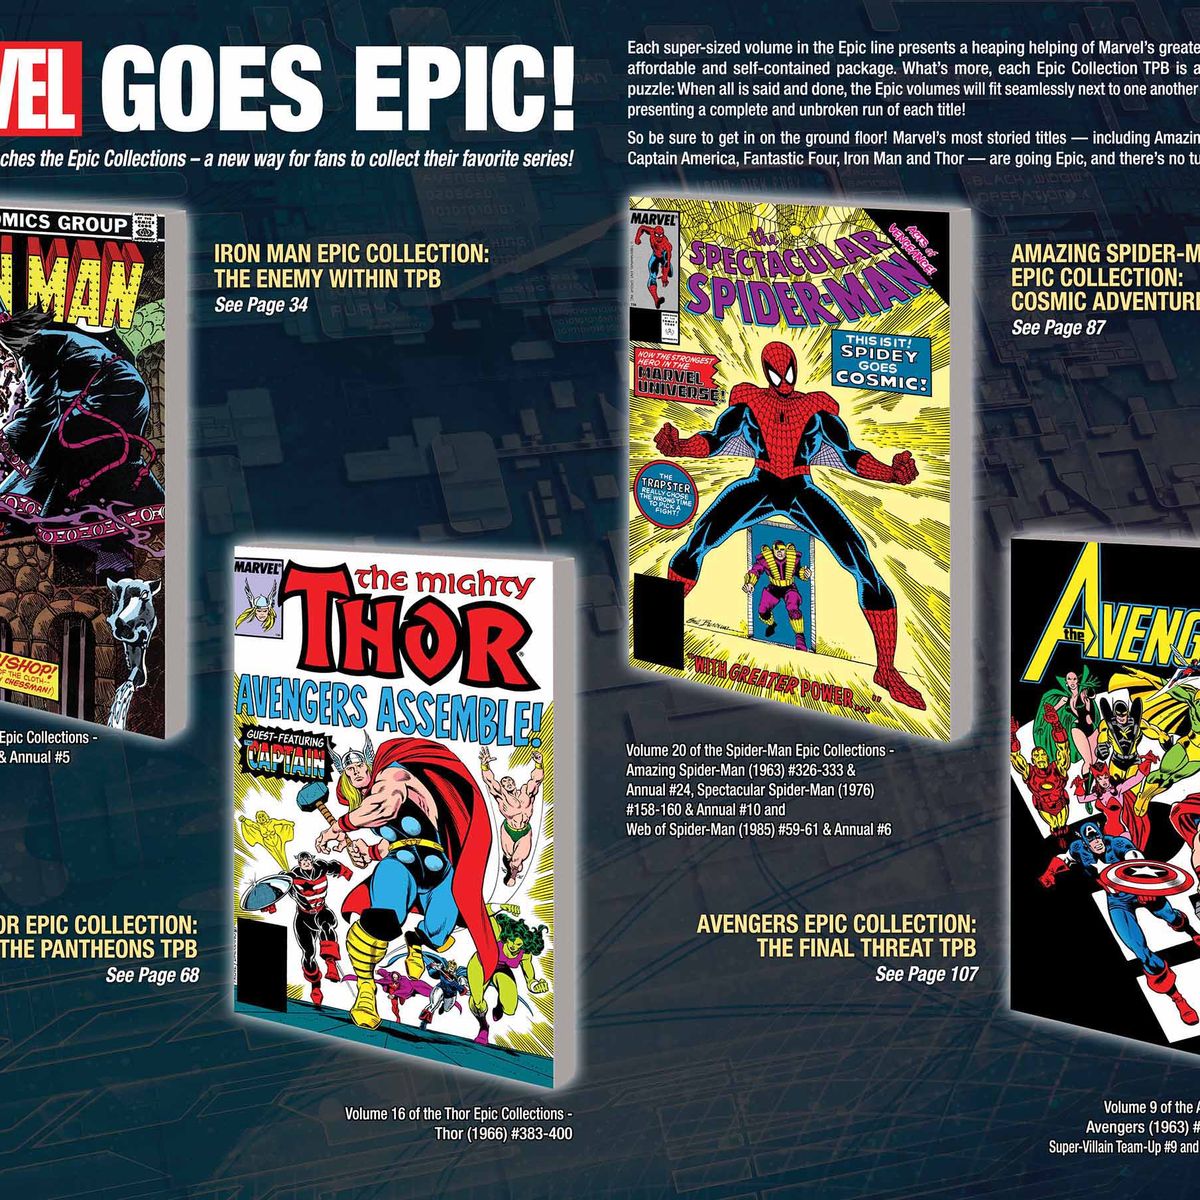 CLASSIC MARVEL EPIC COLLECTION: What's been released, and what's